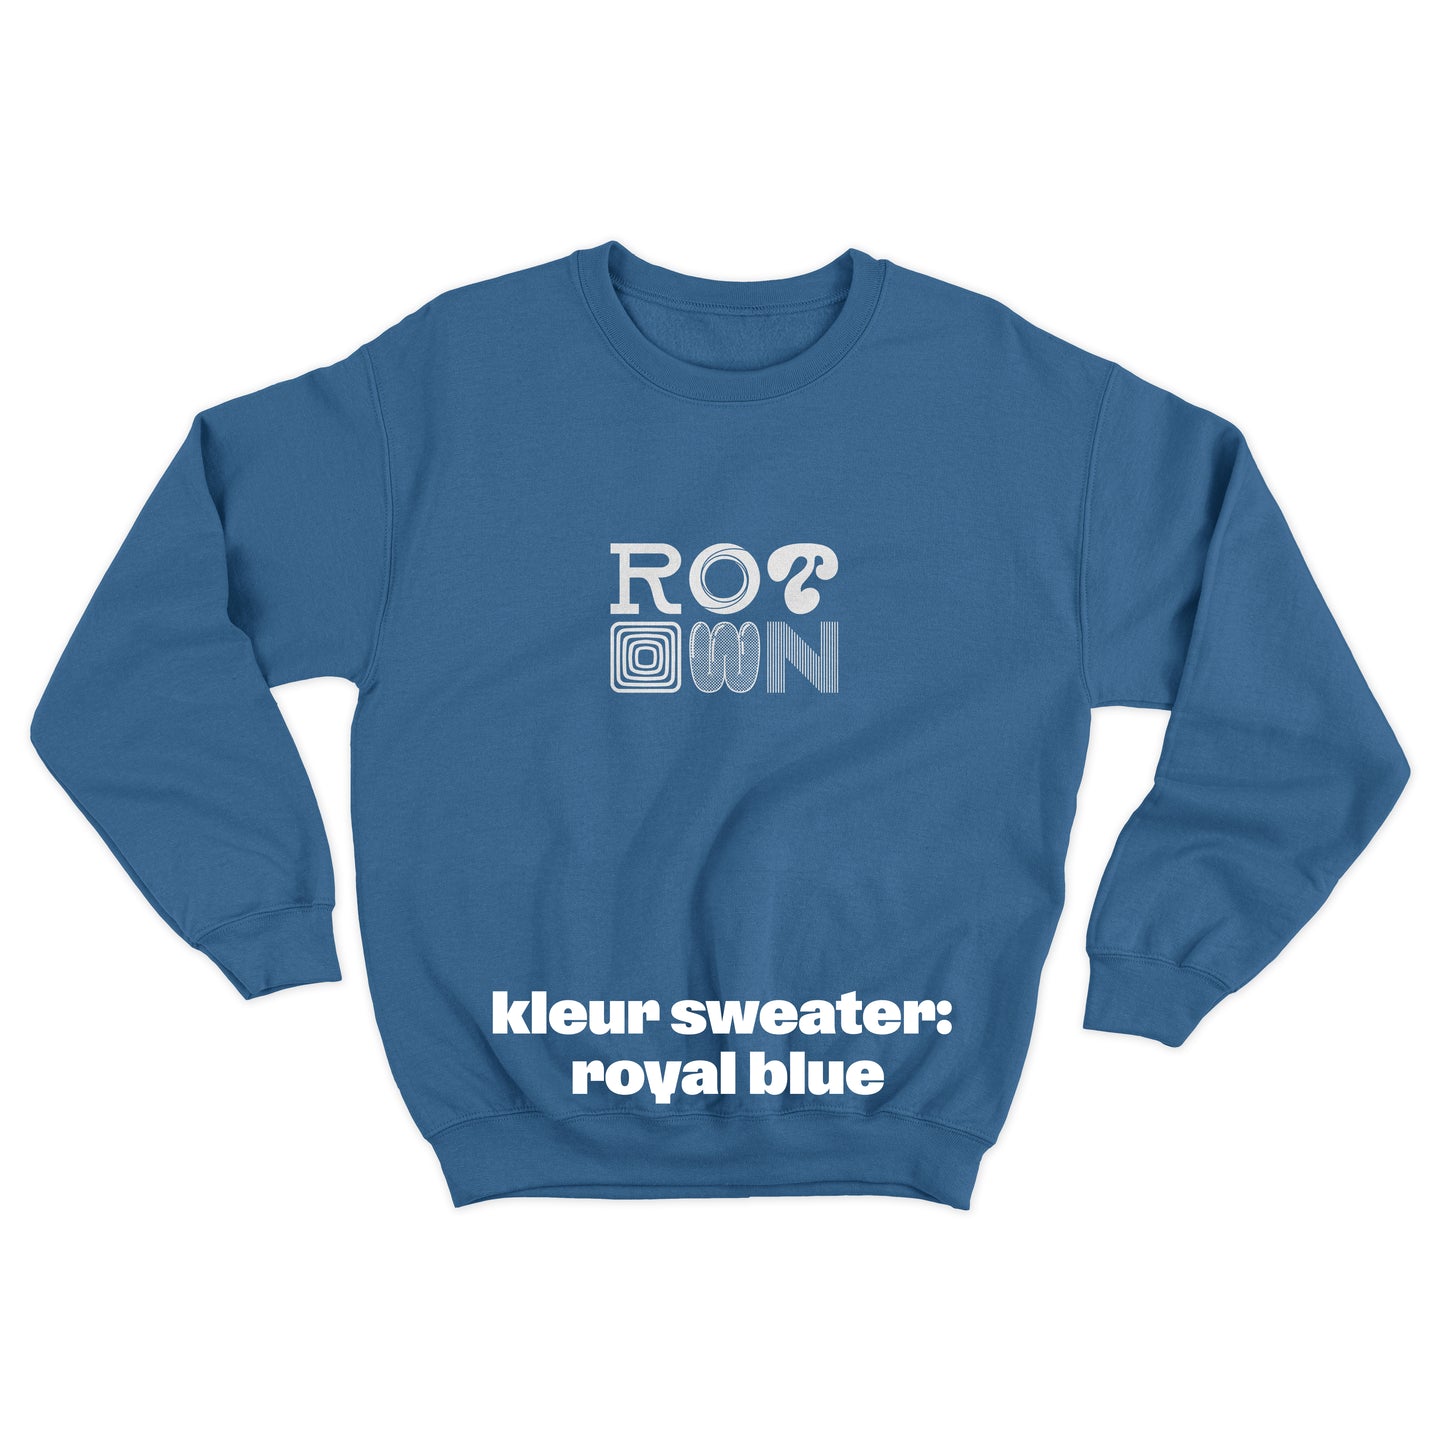 Sweater 'Rotown Letters' • Groot wit logo